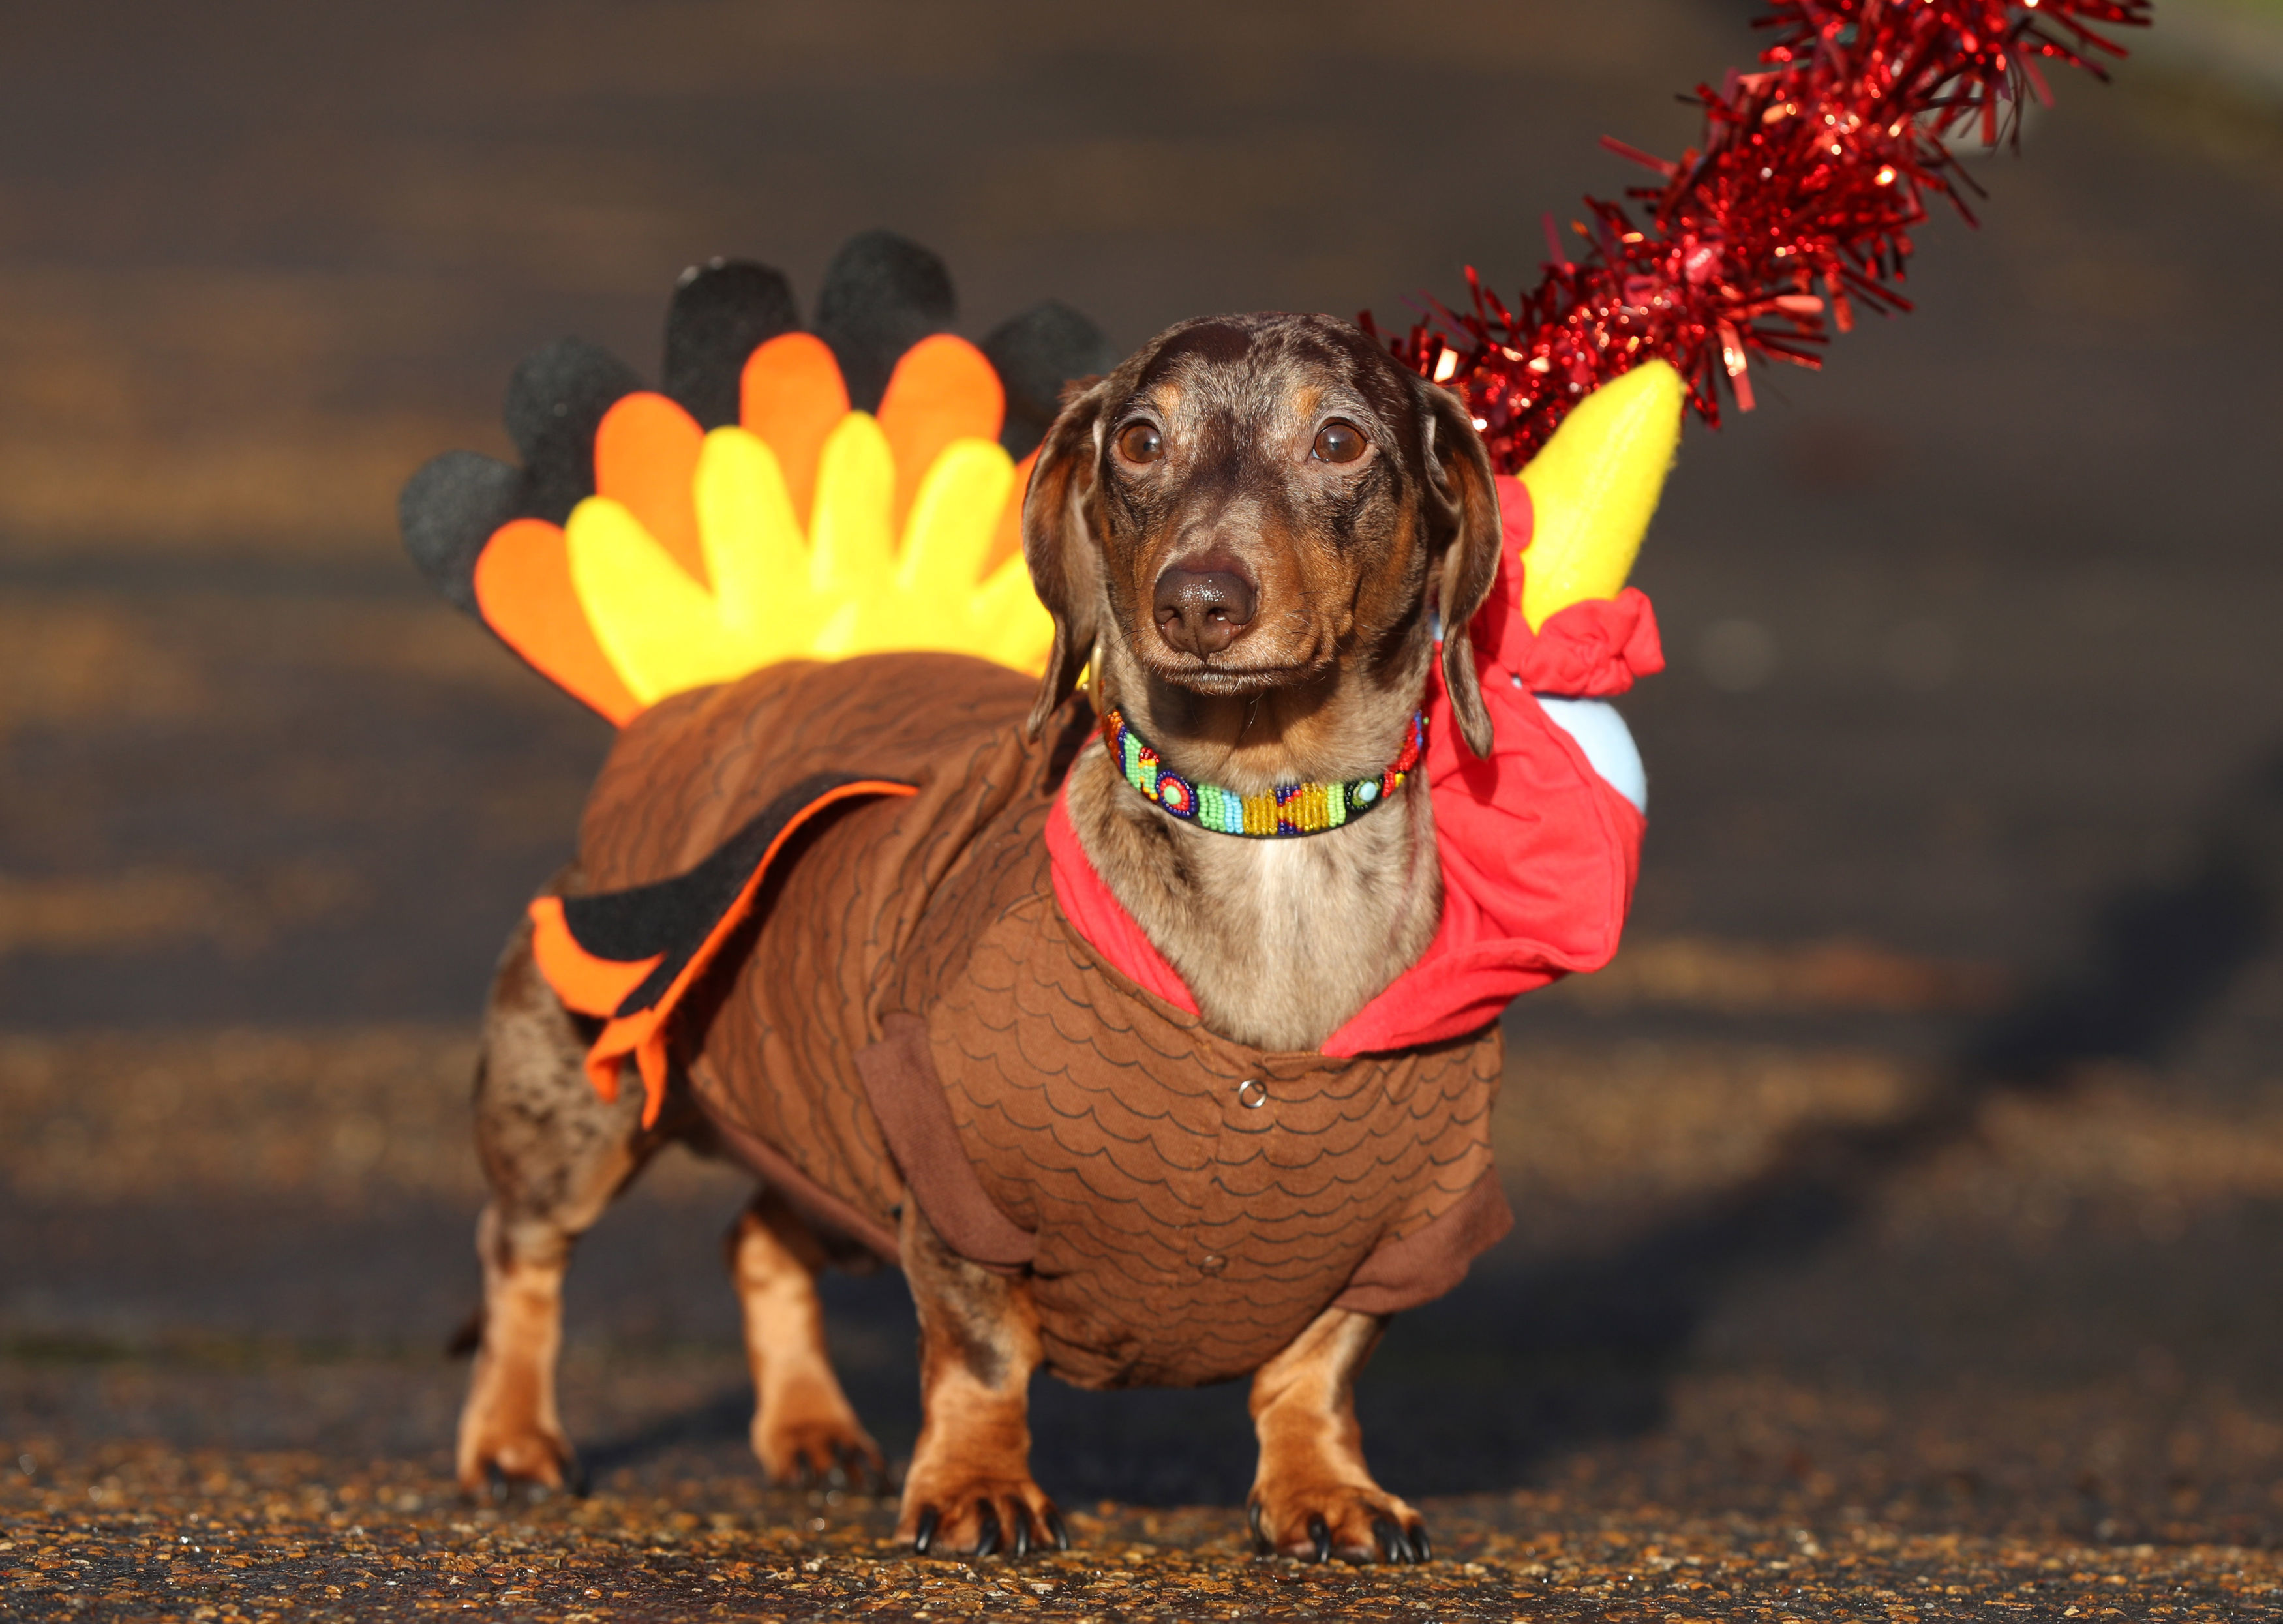 Dachshund LD (Little Dog) takes part in a sausage dog festive walk in Hyde Park